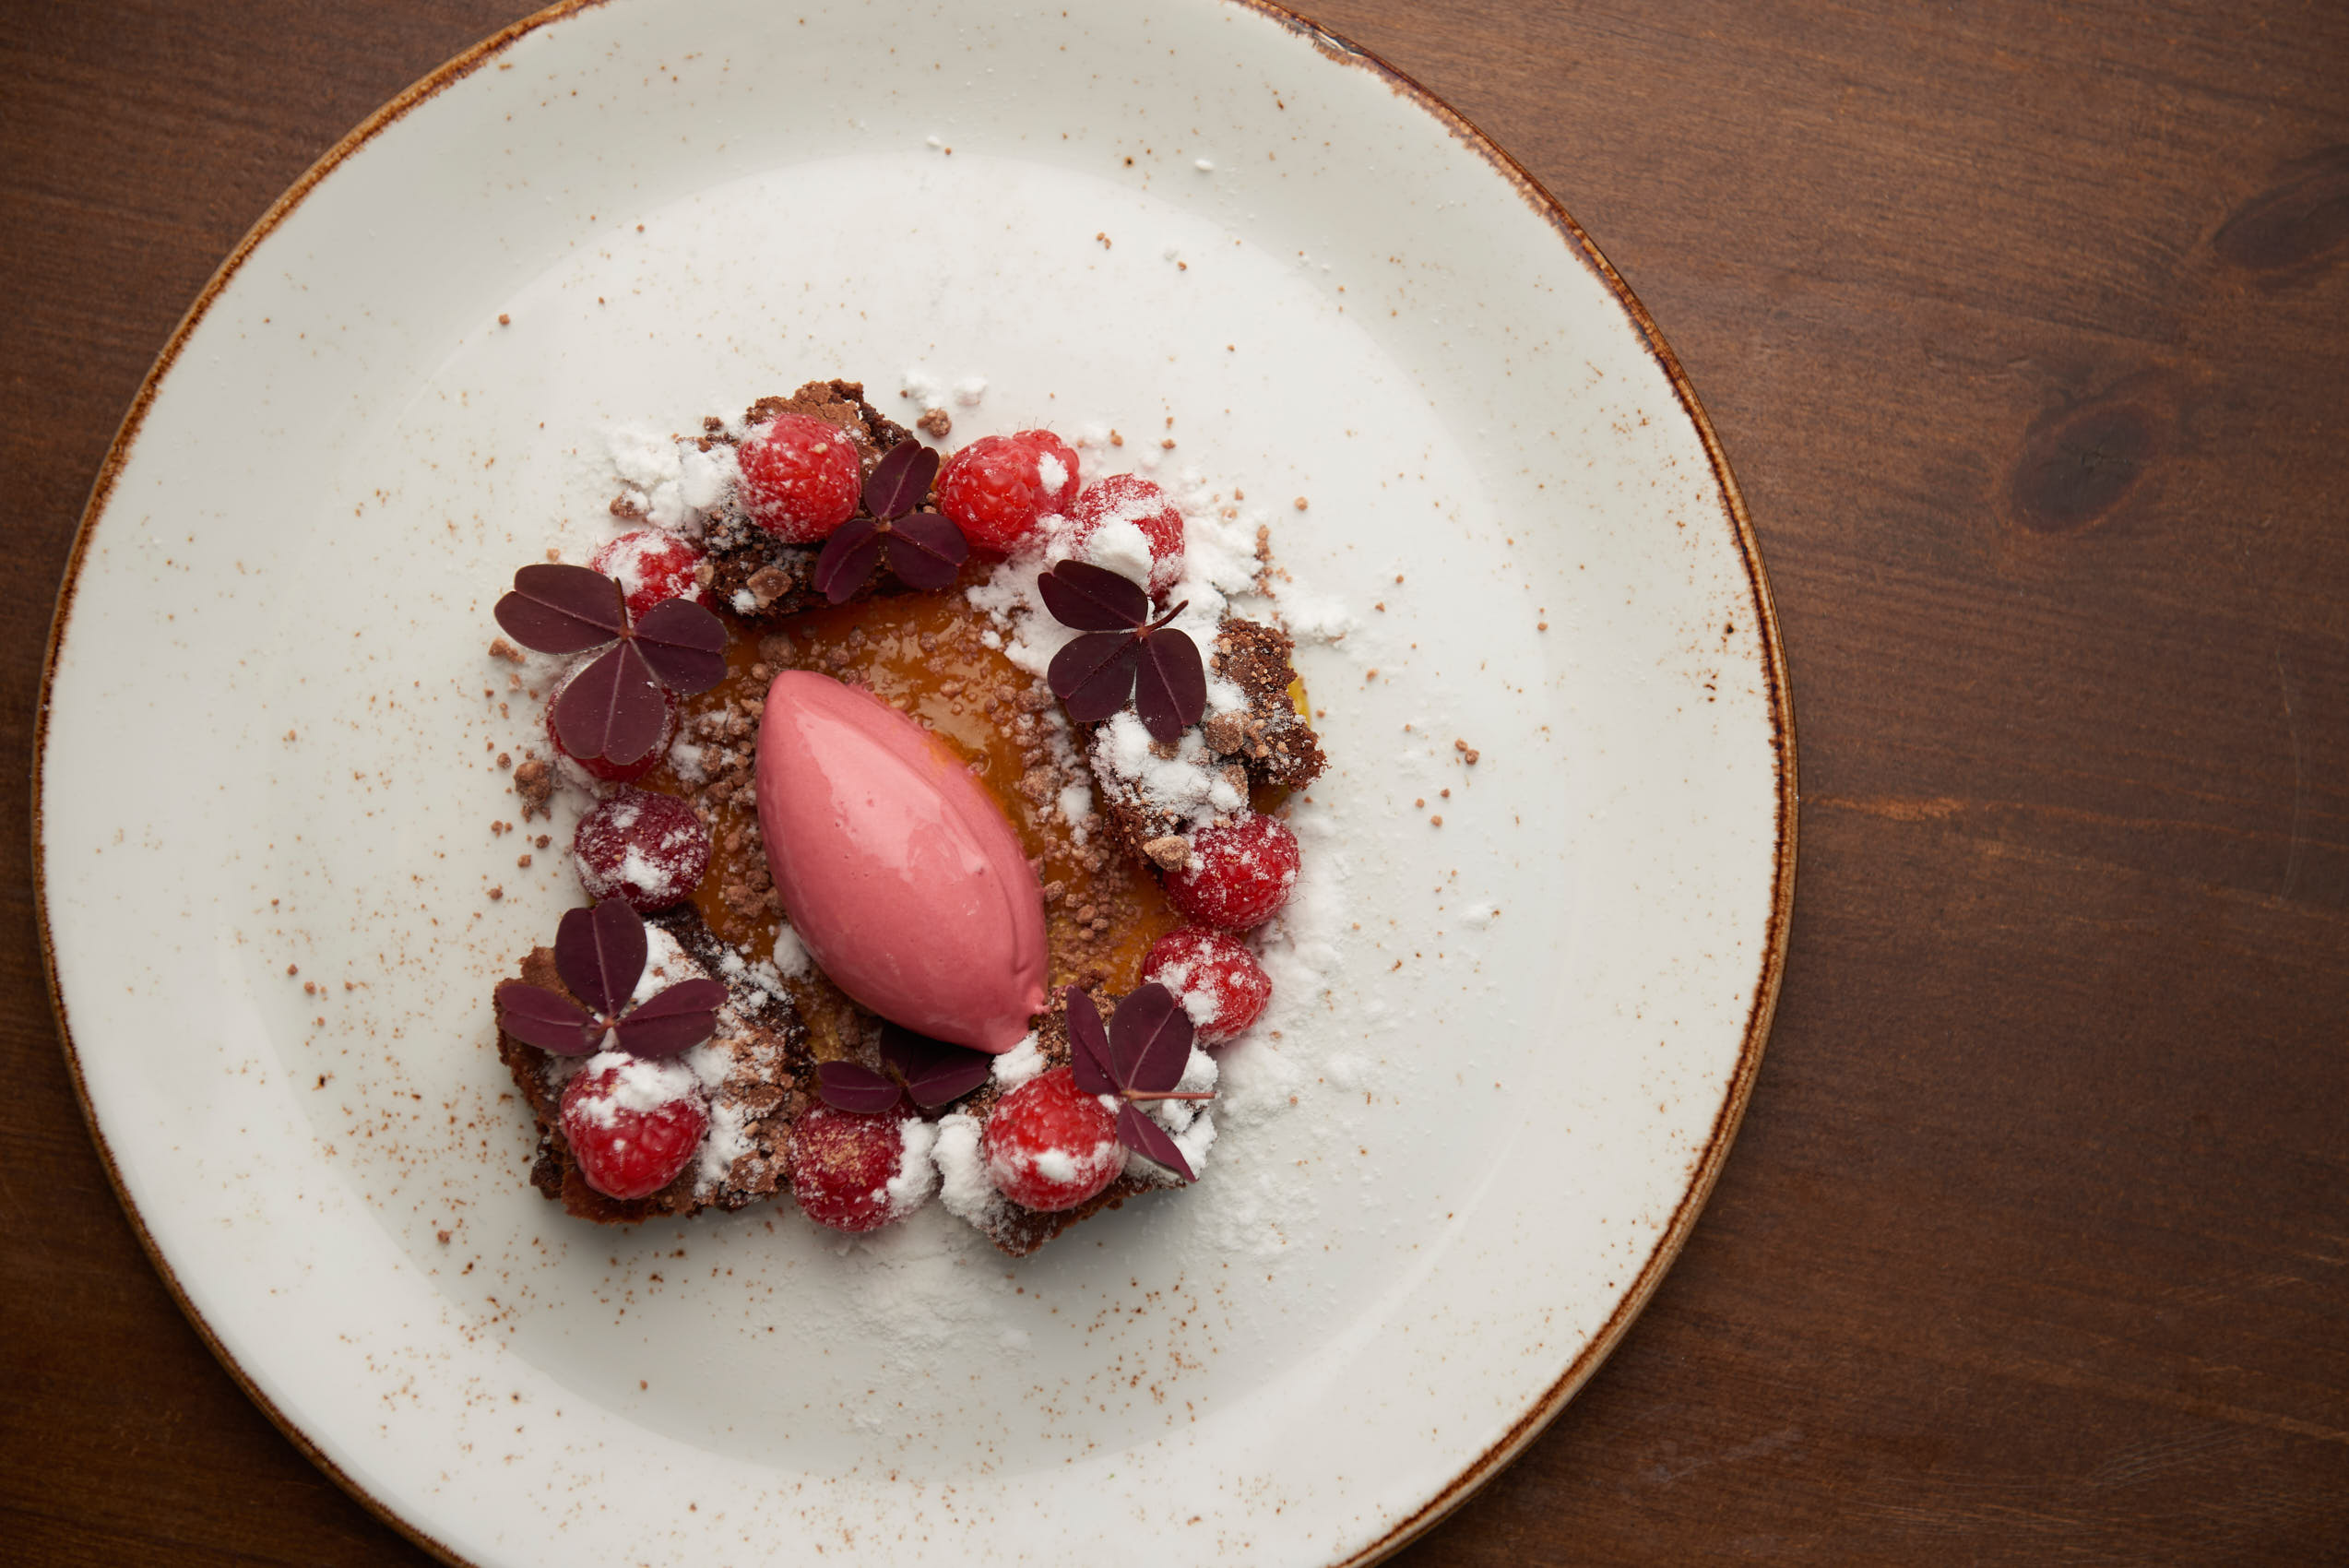 Sorbet ice cream with rasberry and french chocolatdessert with berries photo by Marcel Tiedje